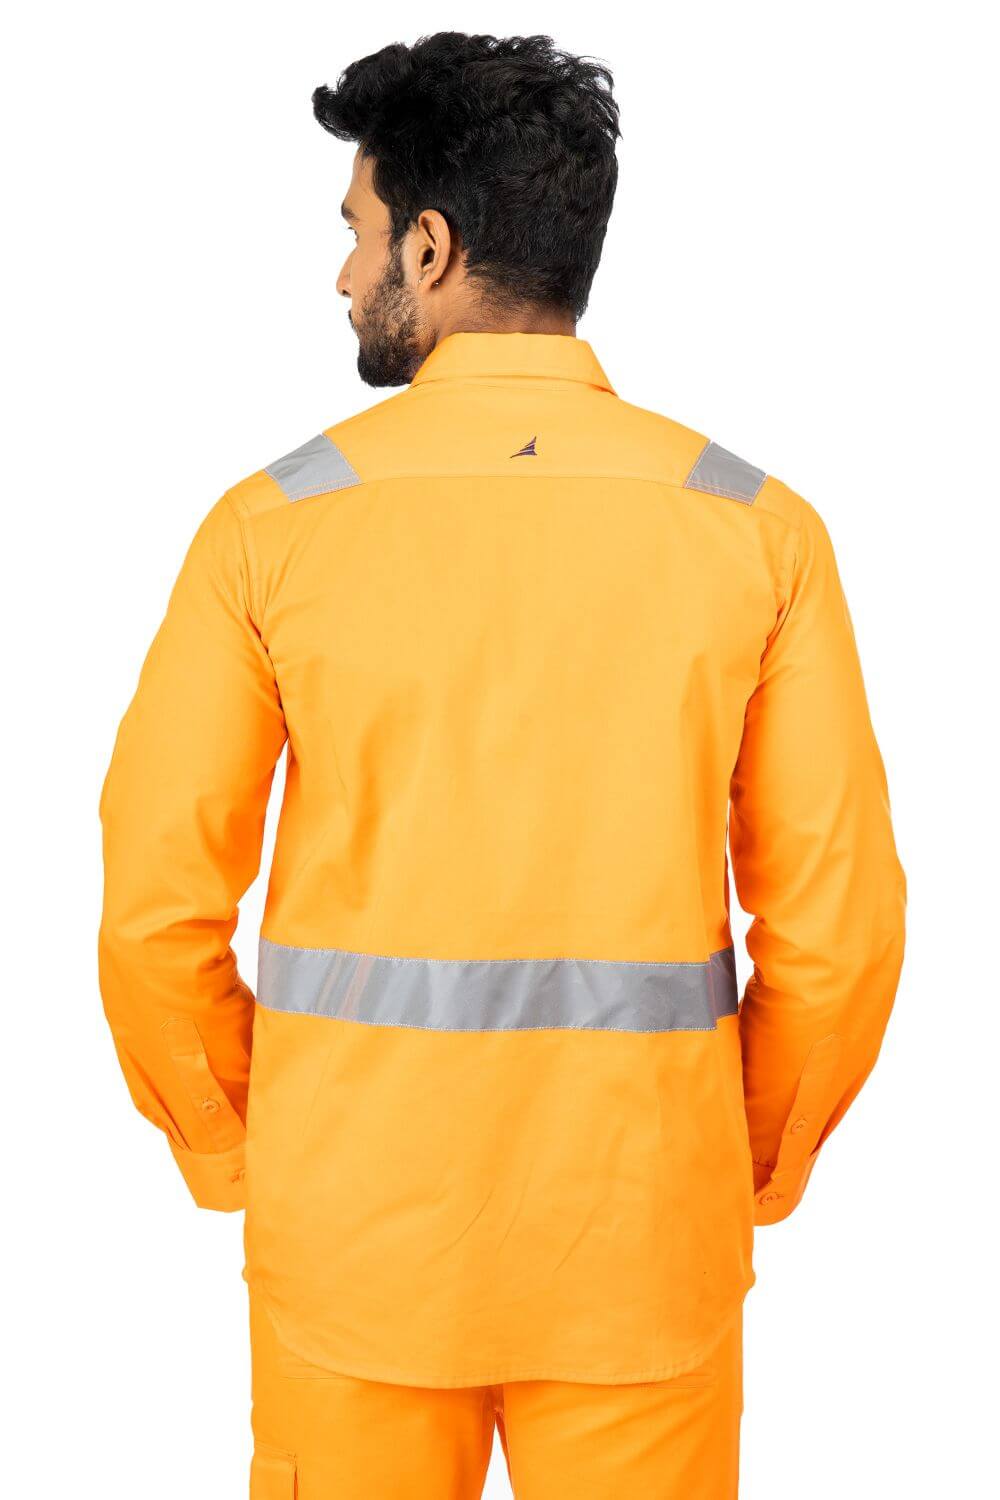 EN 20471 certified with silver reflective tapes Orange Work Shirt for Industrial Use